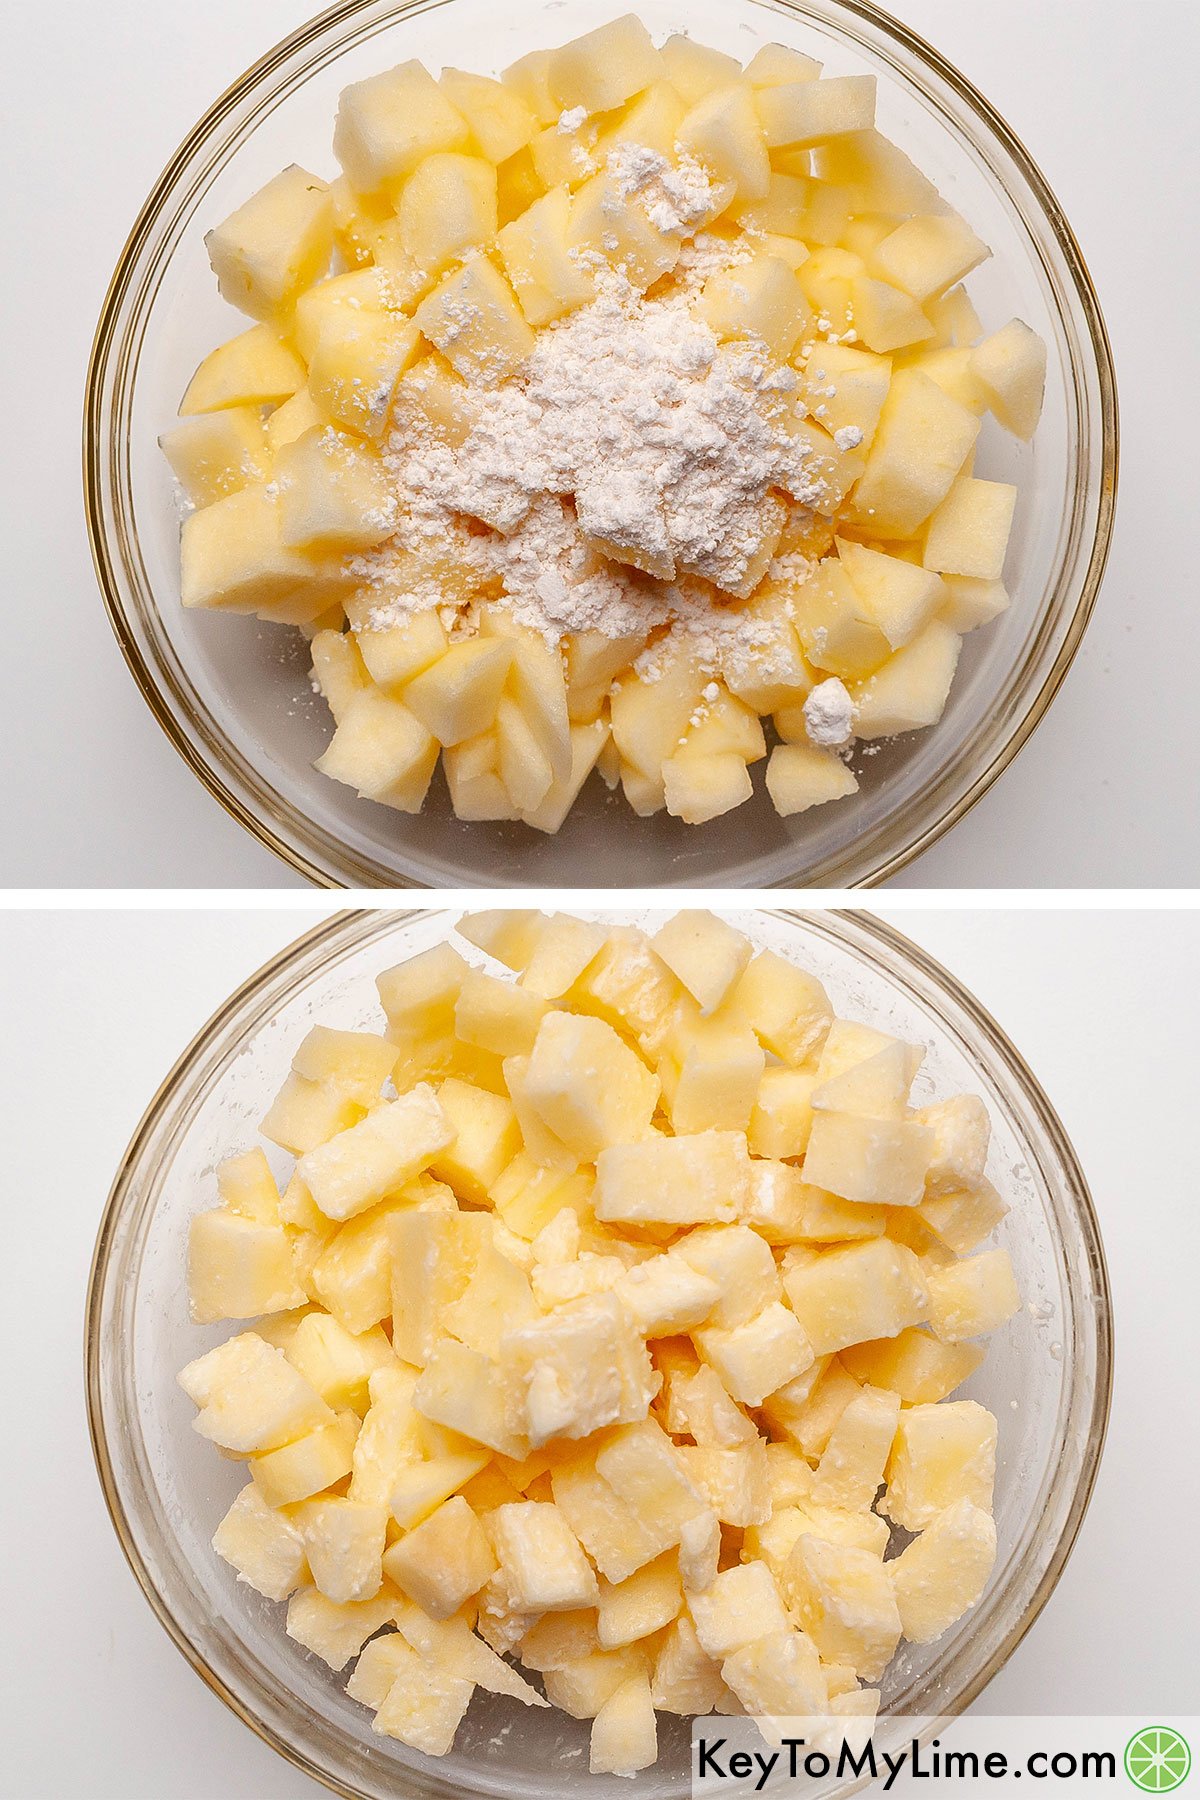 Coating peeled and chopped apples with Bisquick.